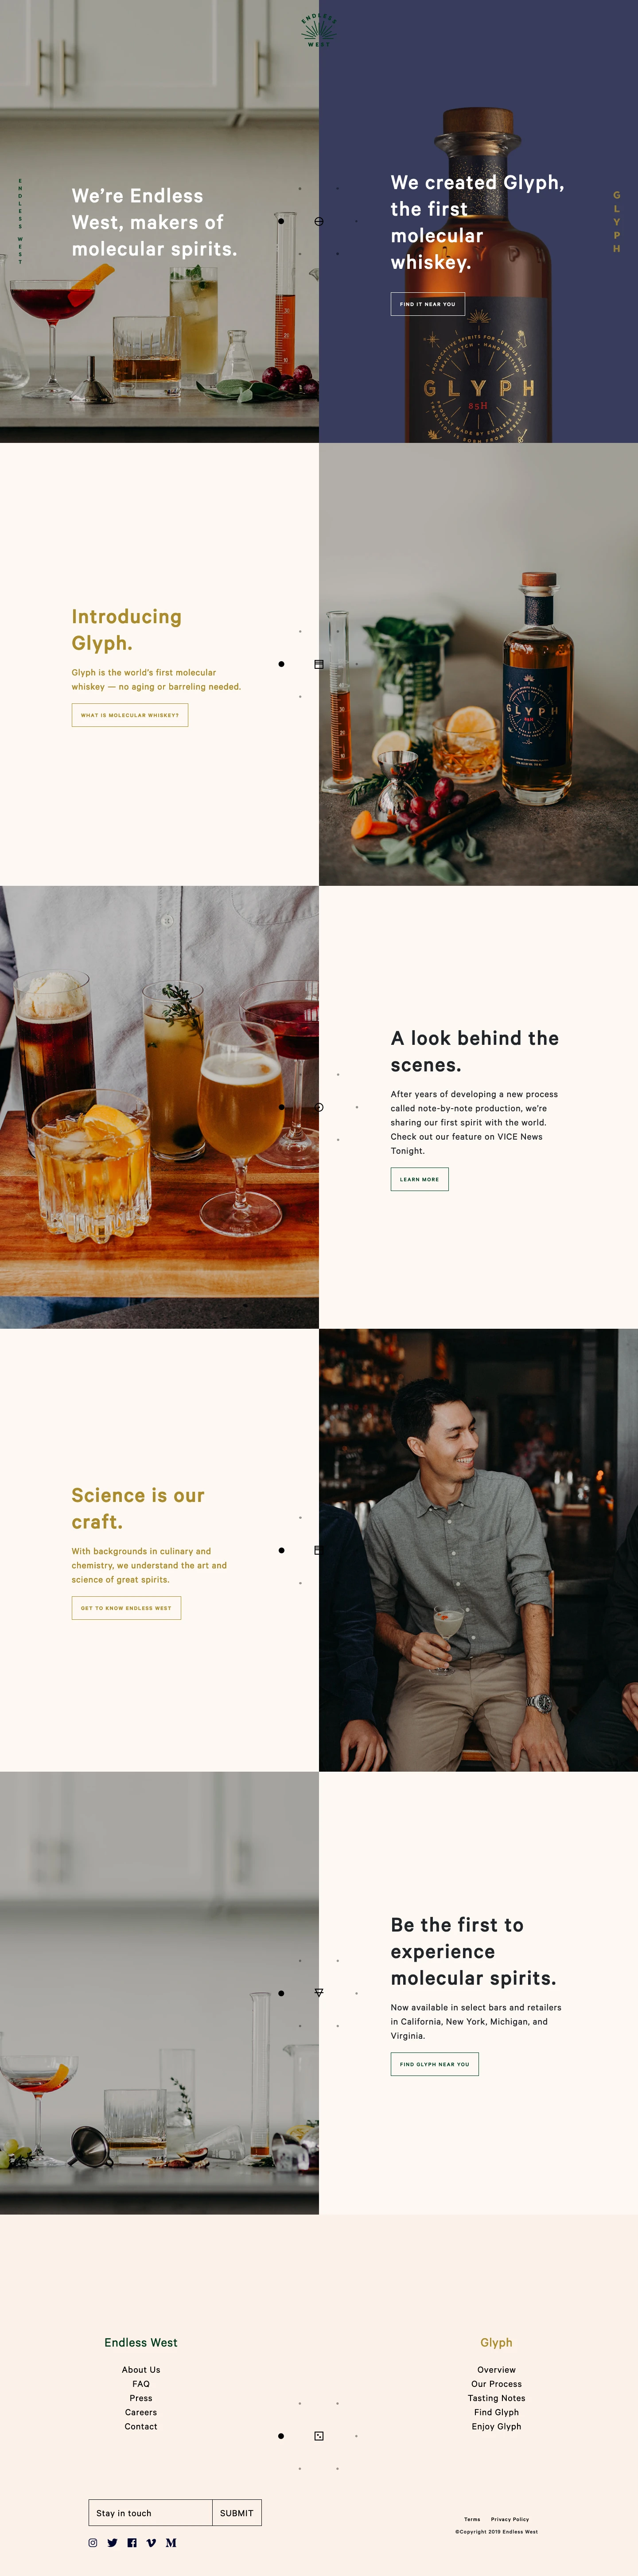 Endless West Landing Page Example: We're Endless West, makers of molecular spirits. Our whiskey, Glyph, is the first to be made note by note — no aging or barreling required.